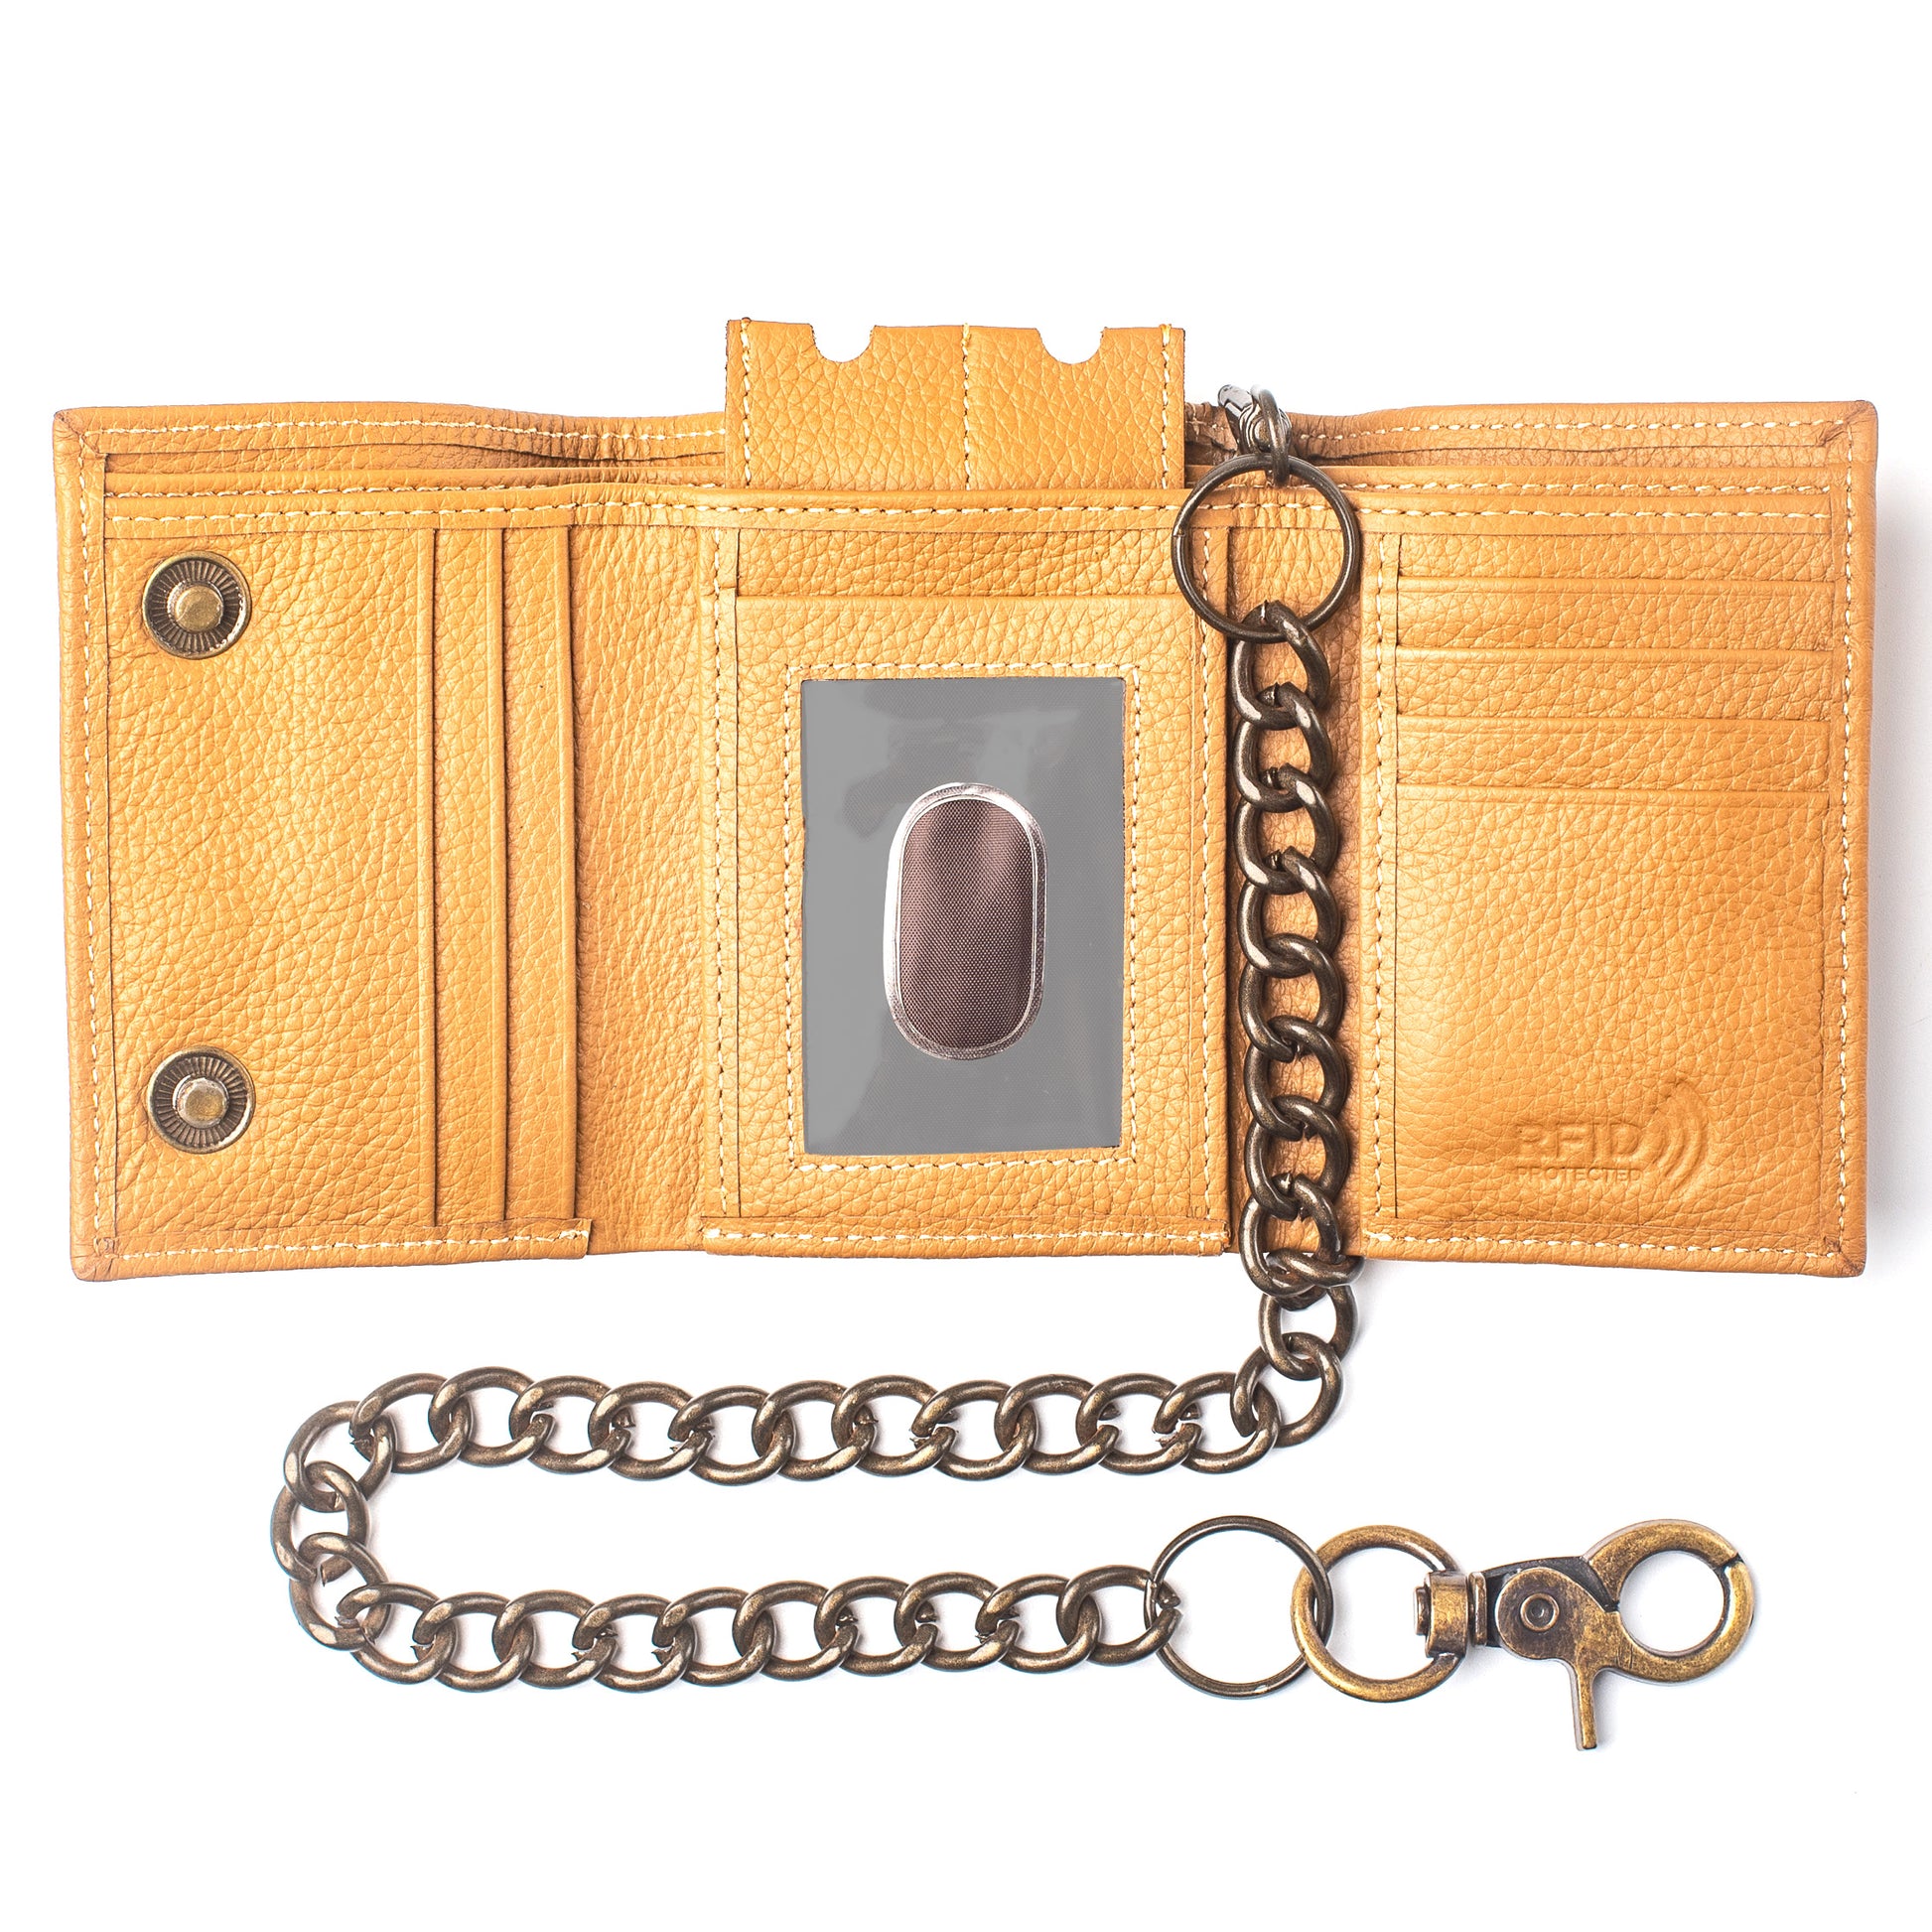 RAWHYD Full Grain Leather Trifold Chain Wallets for Men with Snap Closure,  Mens Wallet, Biker Wallet, Brown